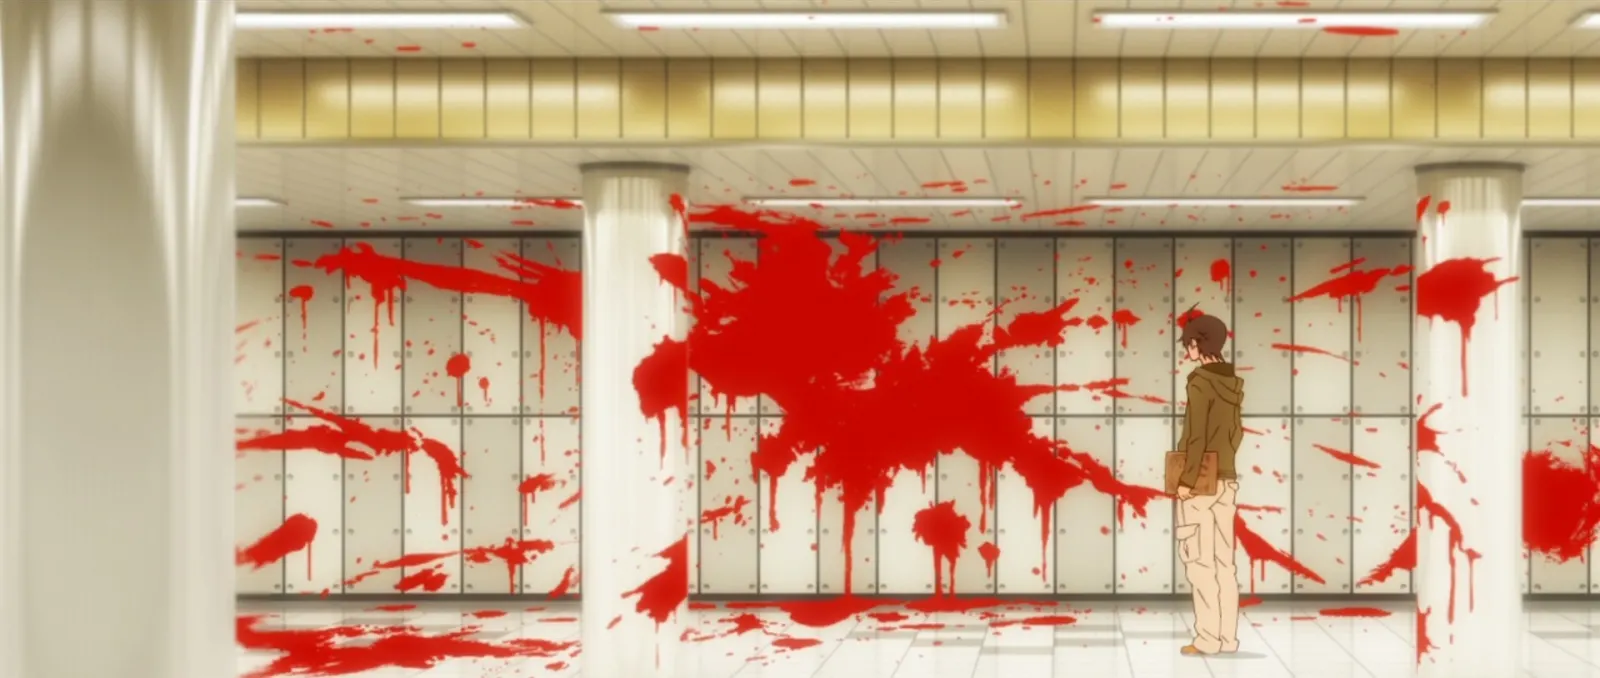 If you ever find yourself in a subway station that looks like this, don’t be like Araragi - just run away.